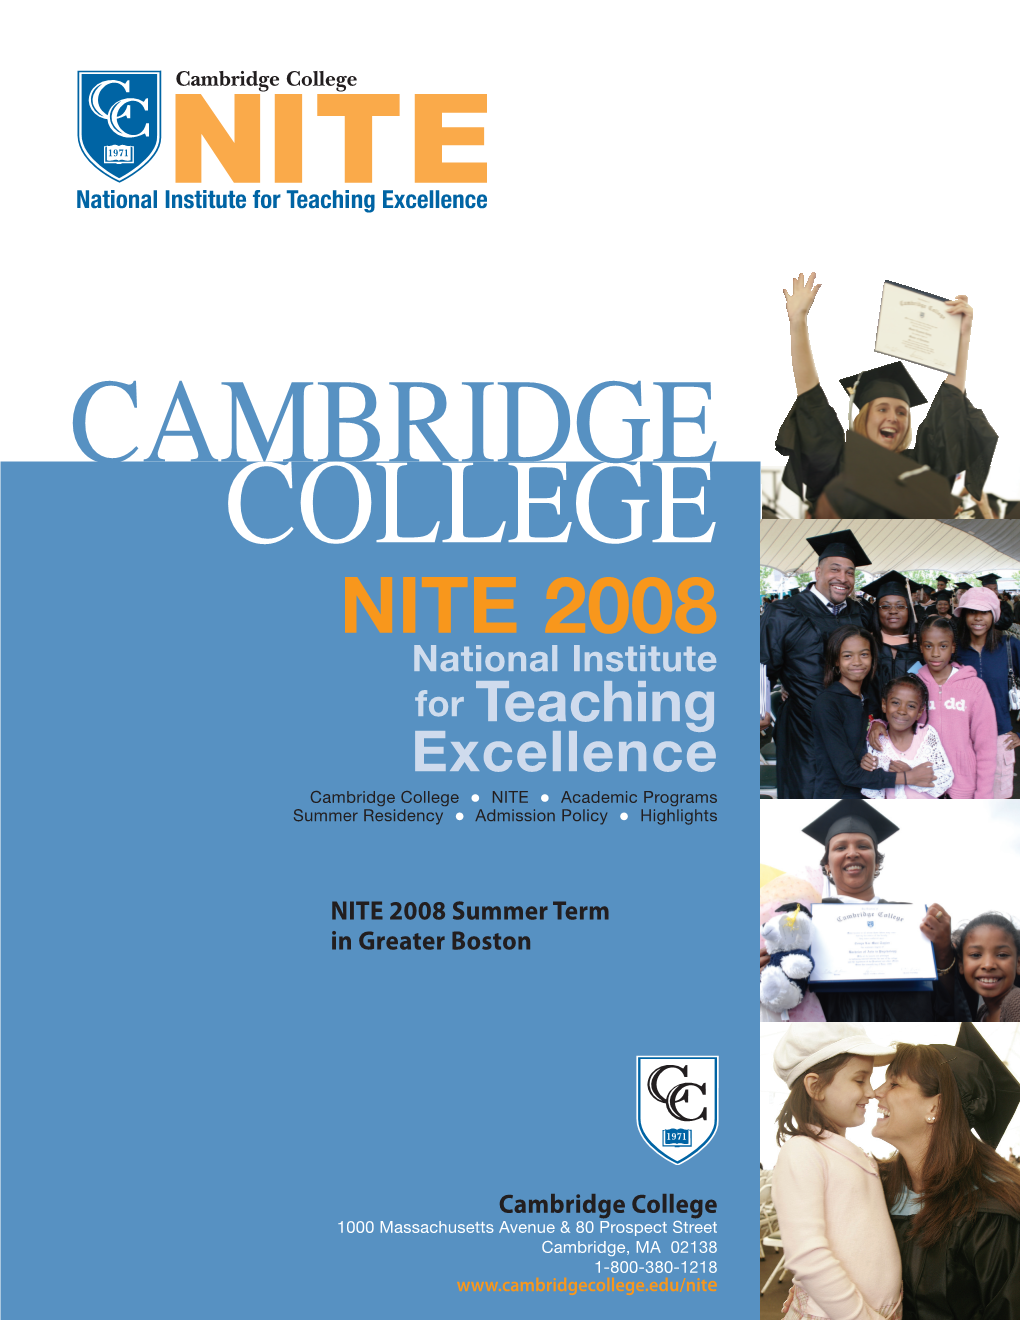 NITE 2008 National Institute for Teaching Excellence Cambridge College L NITE L Academic Programs Summer Residency L Admission Policy L Highlights